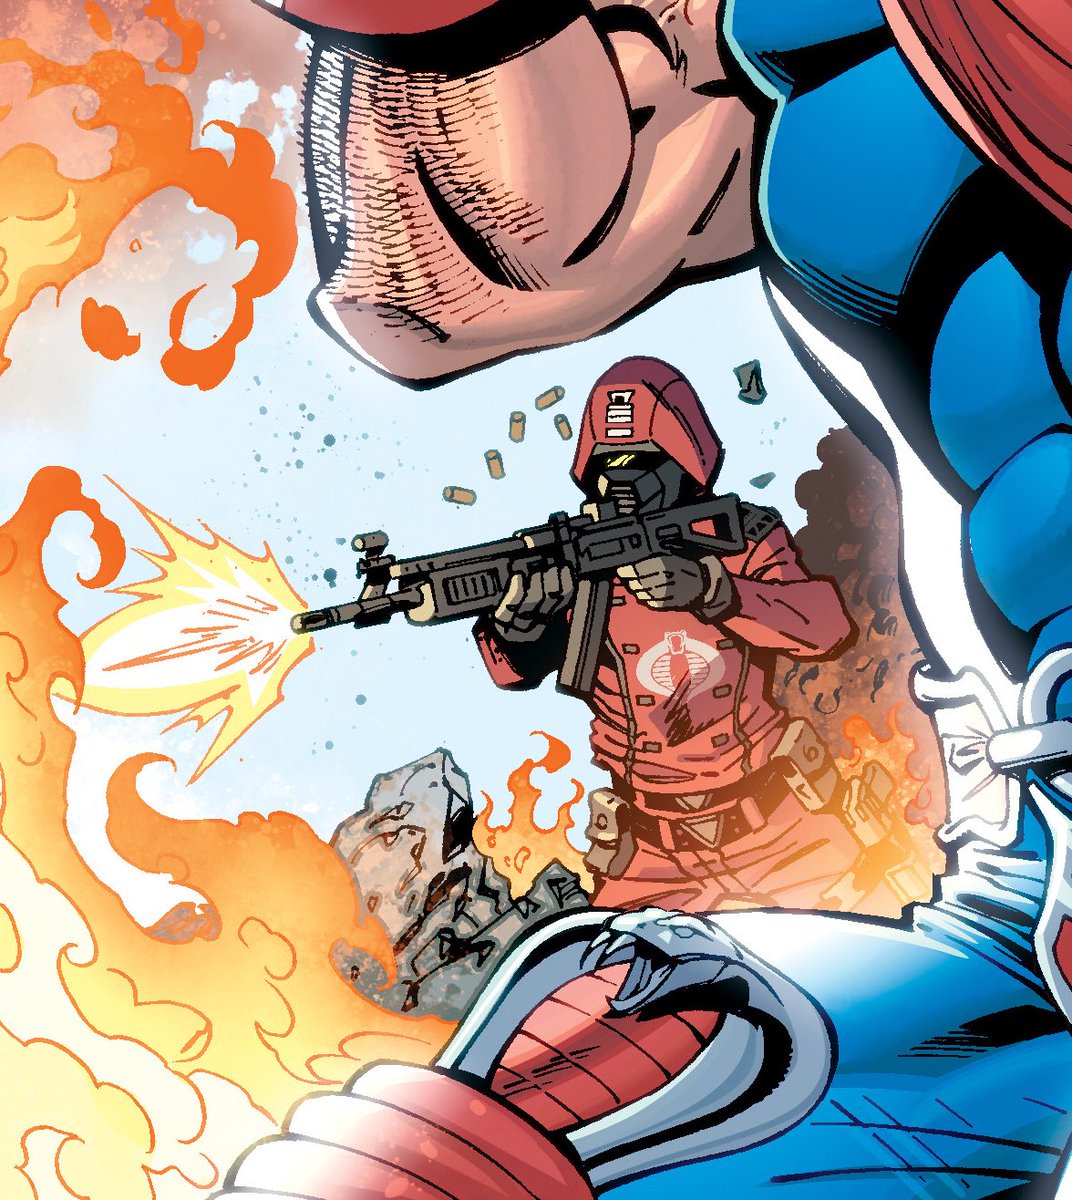 John Royle little very zoomed in peek of some background Cobra Crimson Guard detail on my G.I.Joe issue 267 cover, I can't wait to share the full cover with